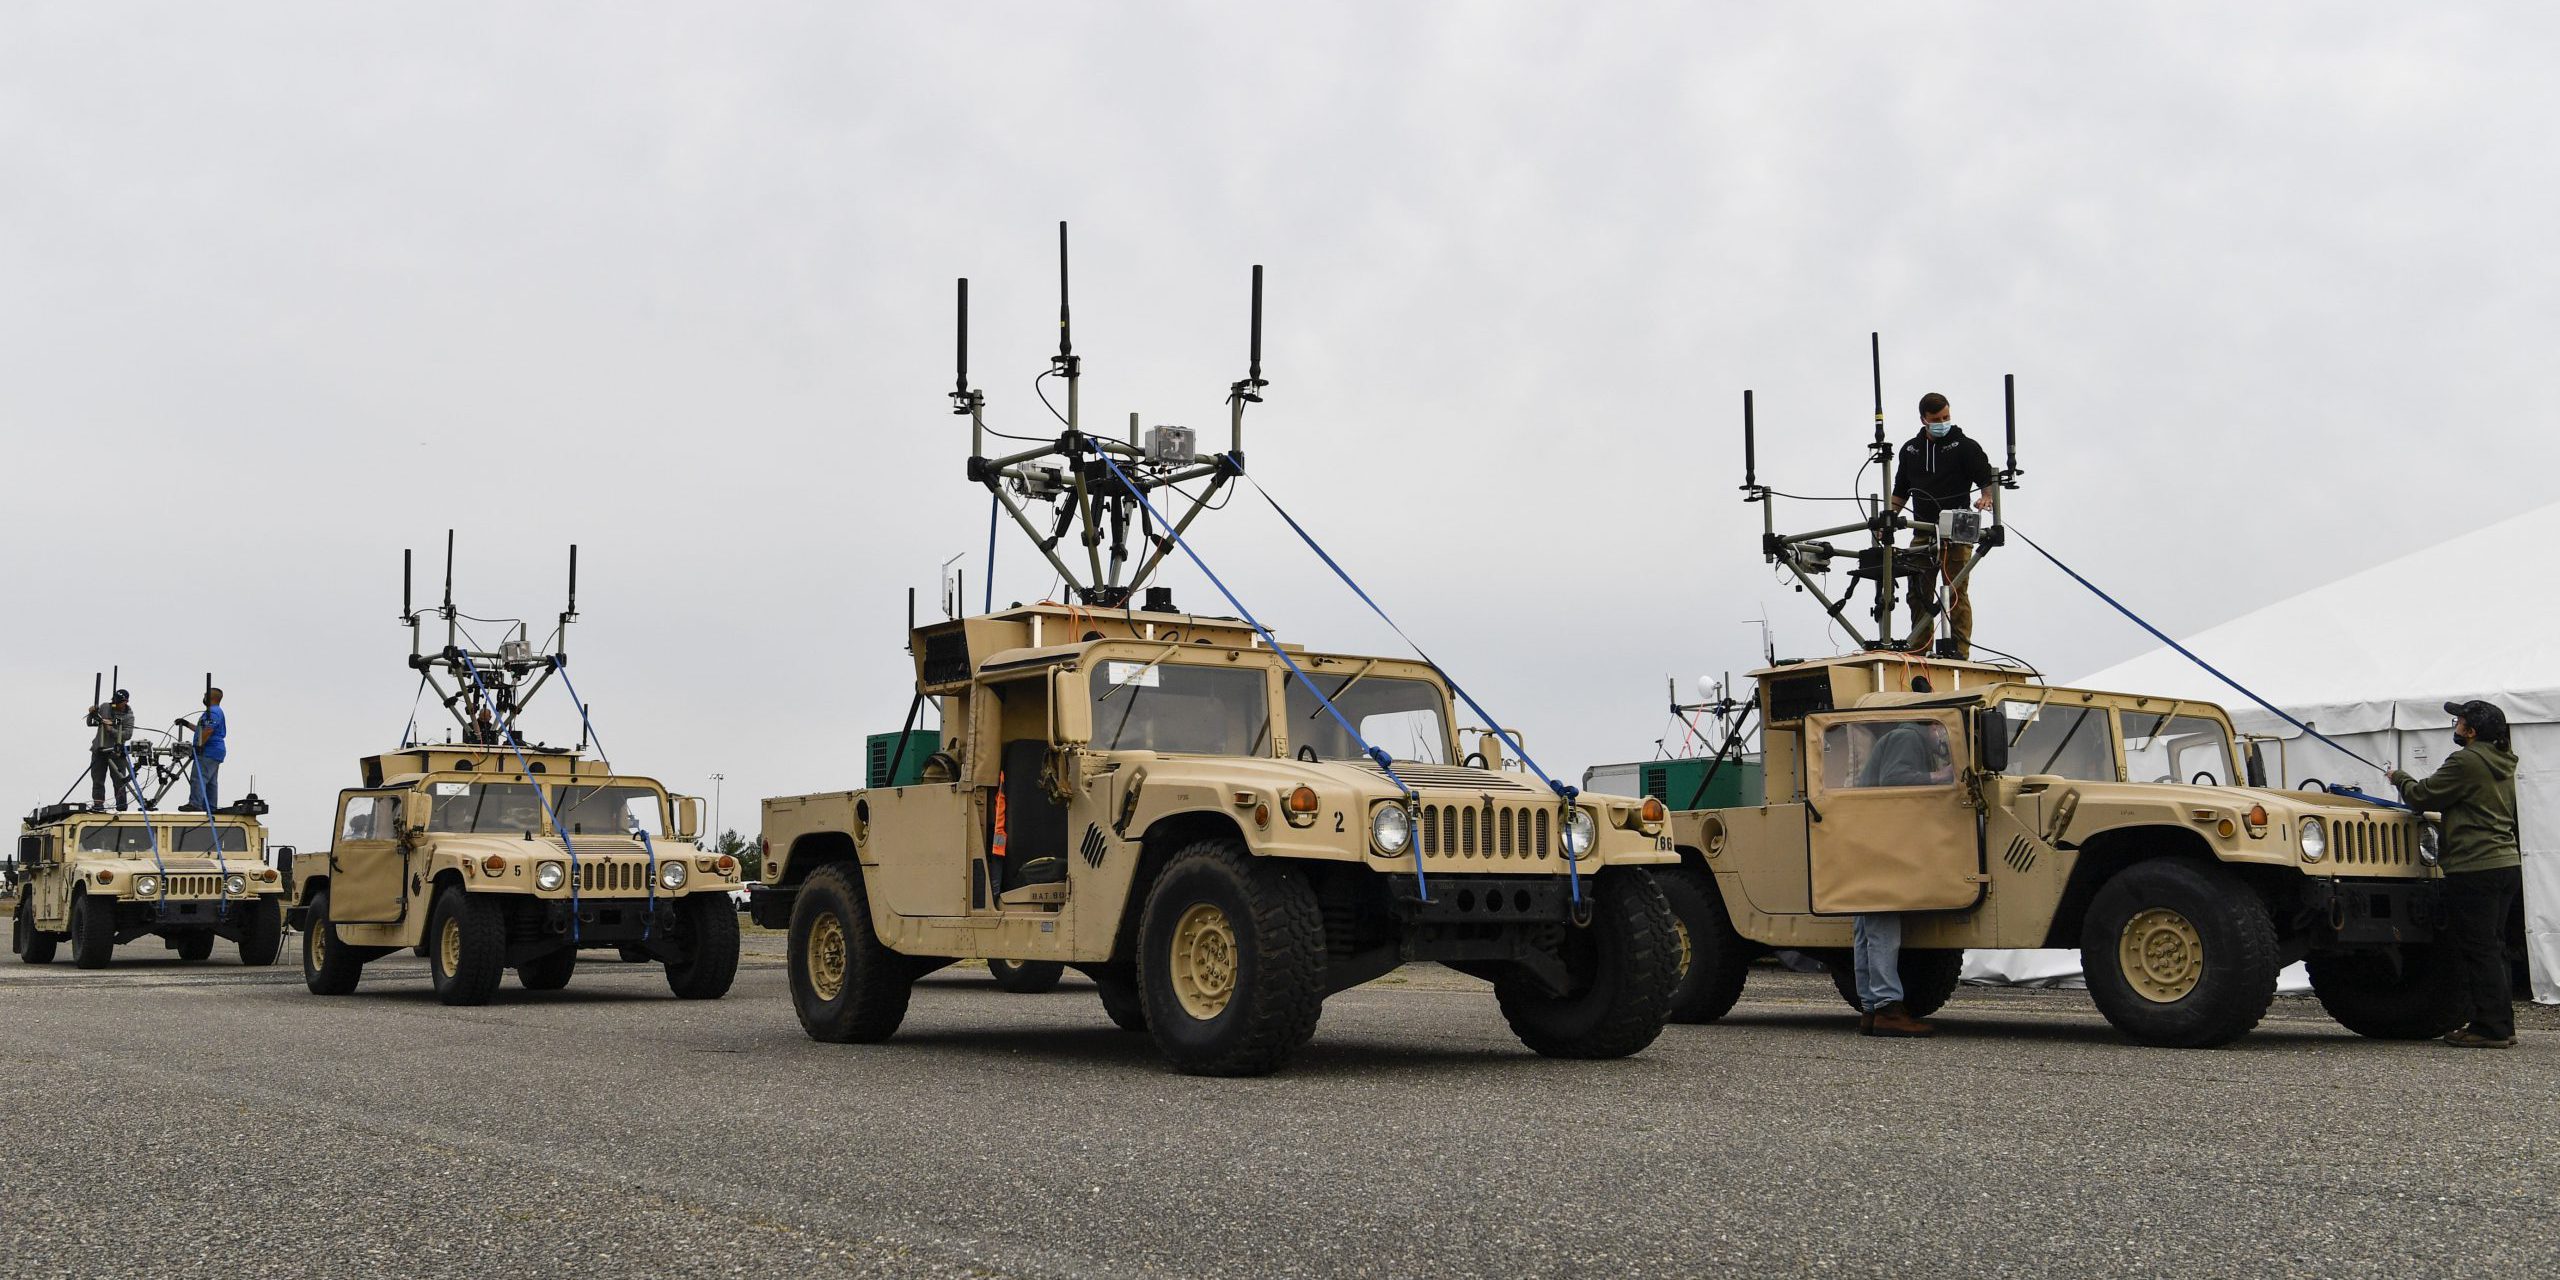 Source: U.S Army, https://www.army.mil/article/246522/army_engineers_field_test_robotic_combat_vehicle_communications